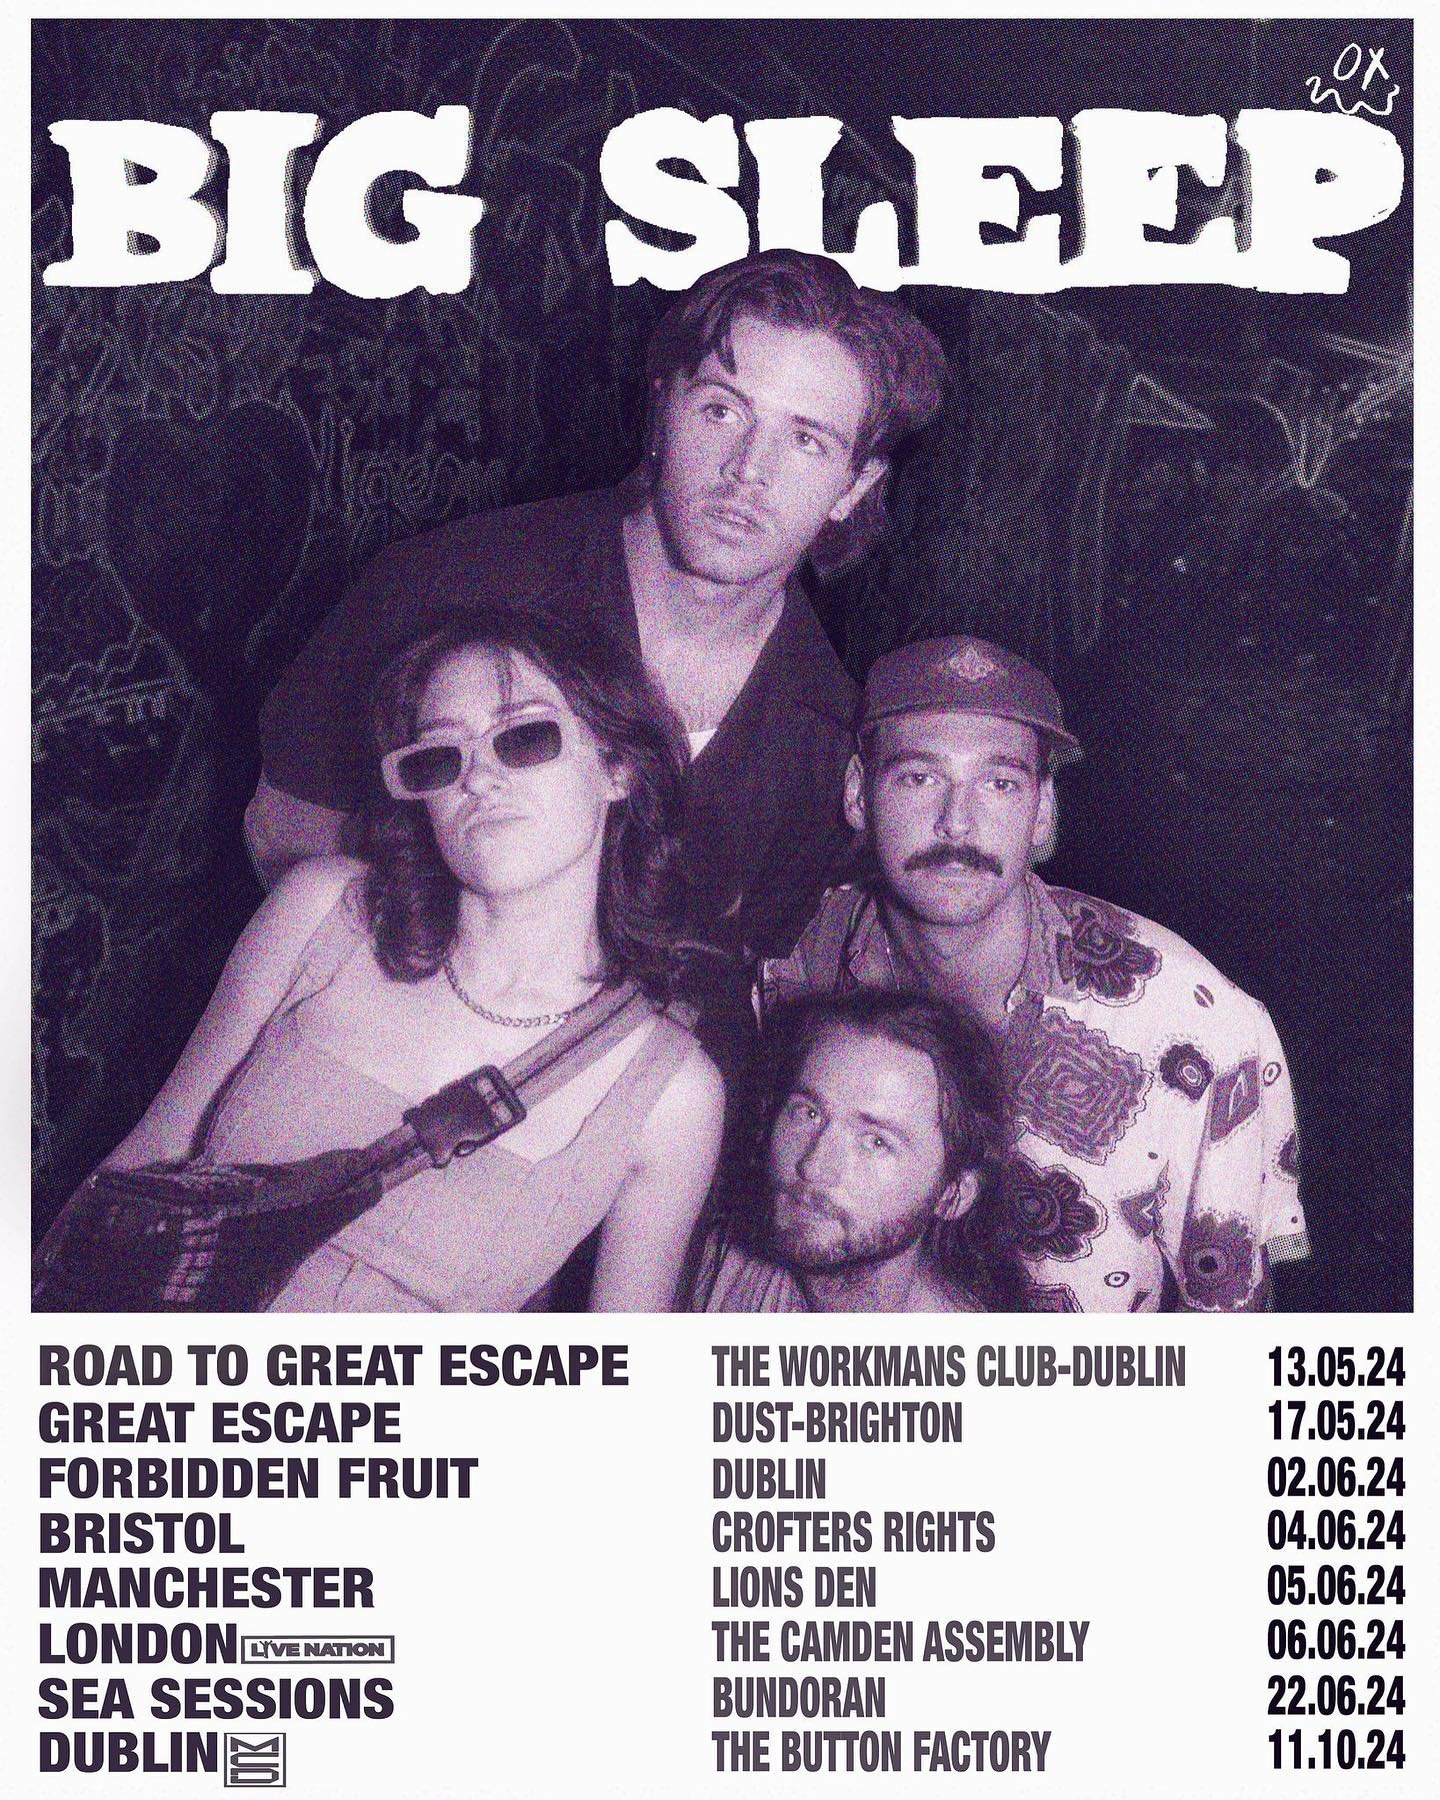 O N  T O U R

Busy couple of months for @bigsleepmusic with a nice lil Irish and UK tour happening 

Catch them playing:
@greatescapeireland in @workmansclub 
@greatescapefest in Dust, Brighton 
@forbiddenfruitfestival in Dublin
@crofters_rights in B